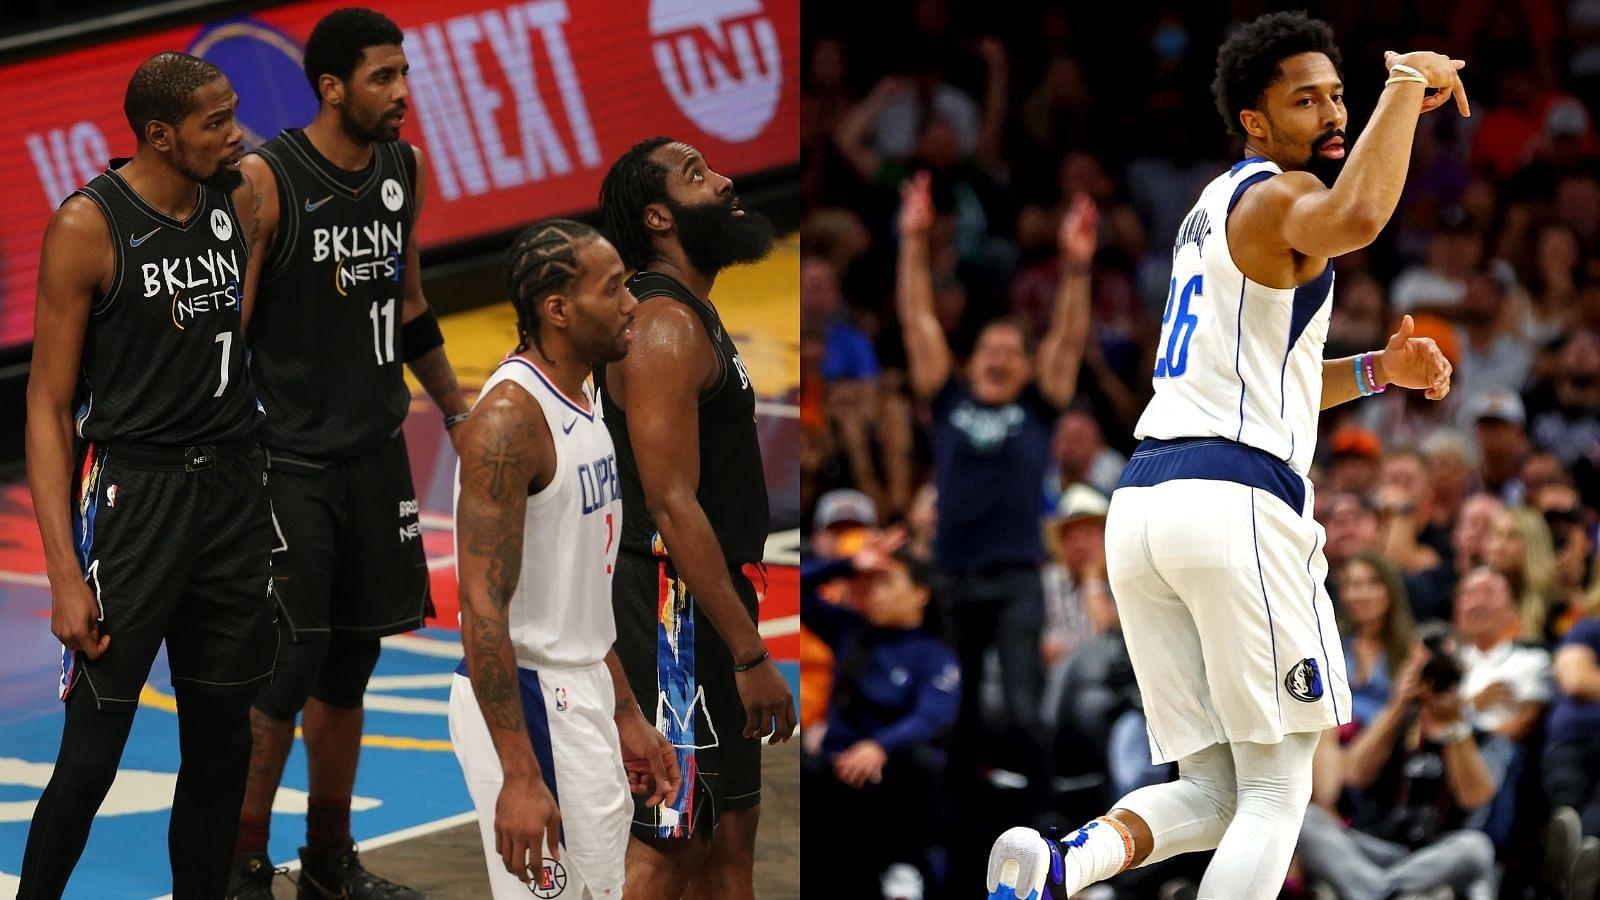 "Spencer Dinwiddie made the Conference Finals earlier than KD, Kyrie Irving and James Harden":